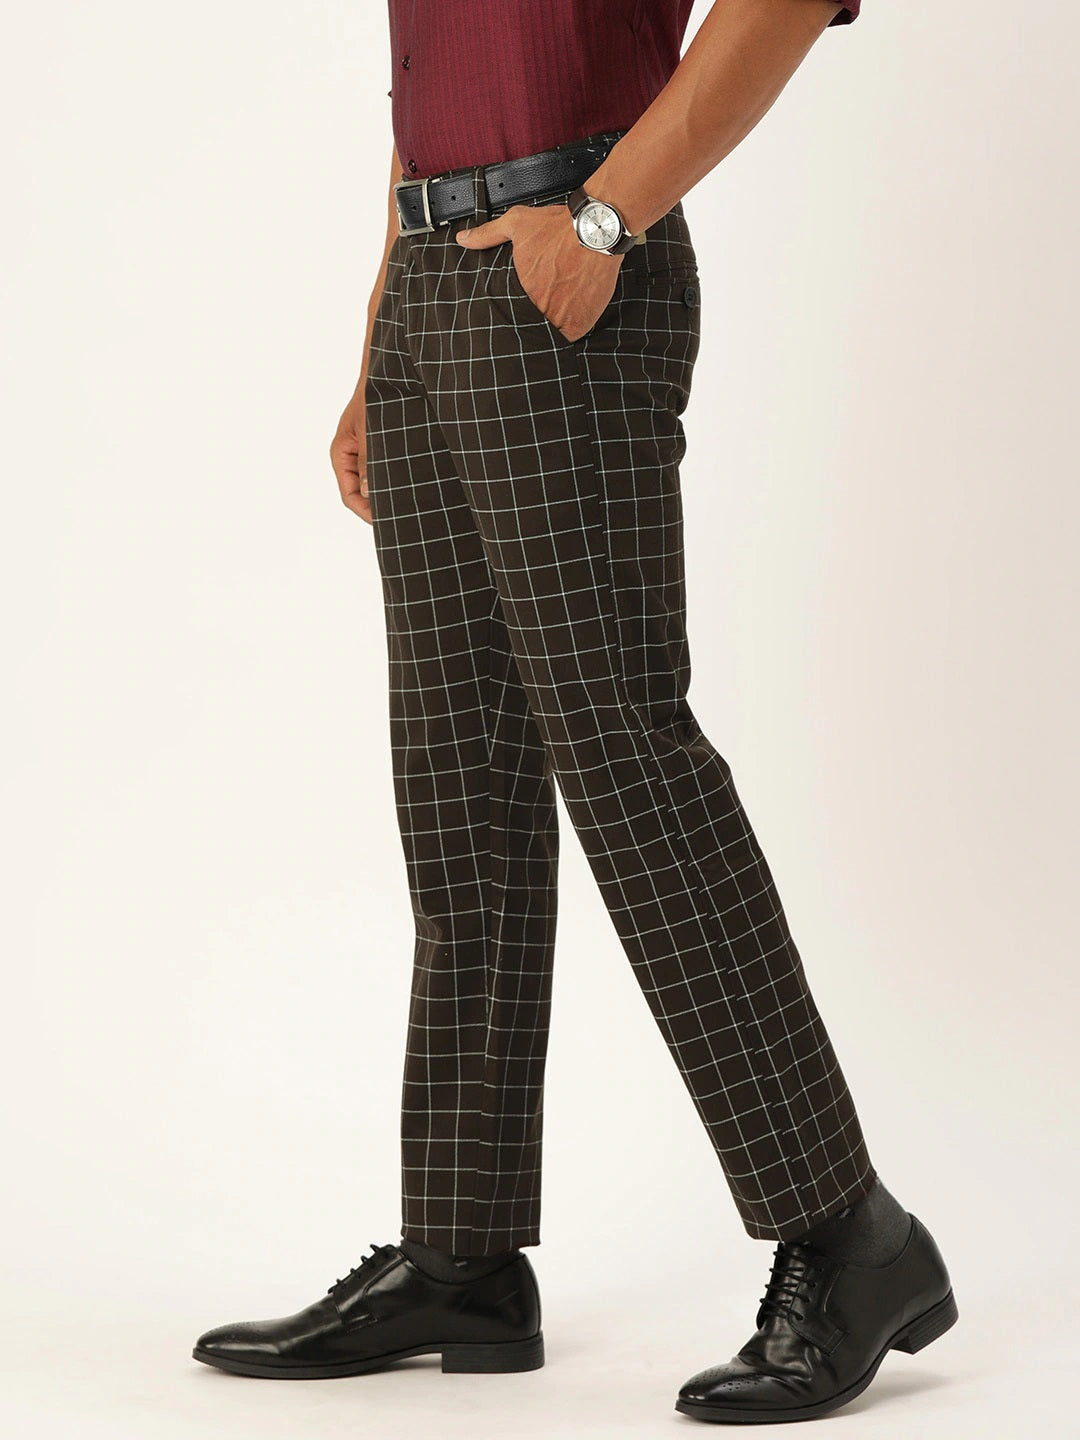 Relaxed Fit Trousers - Dark beige/Checked - Men | H&M IN